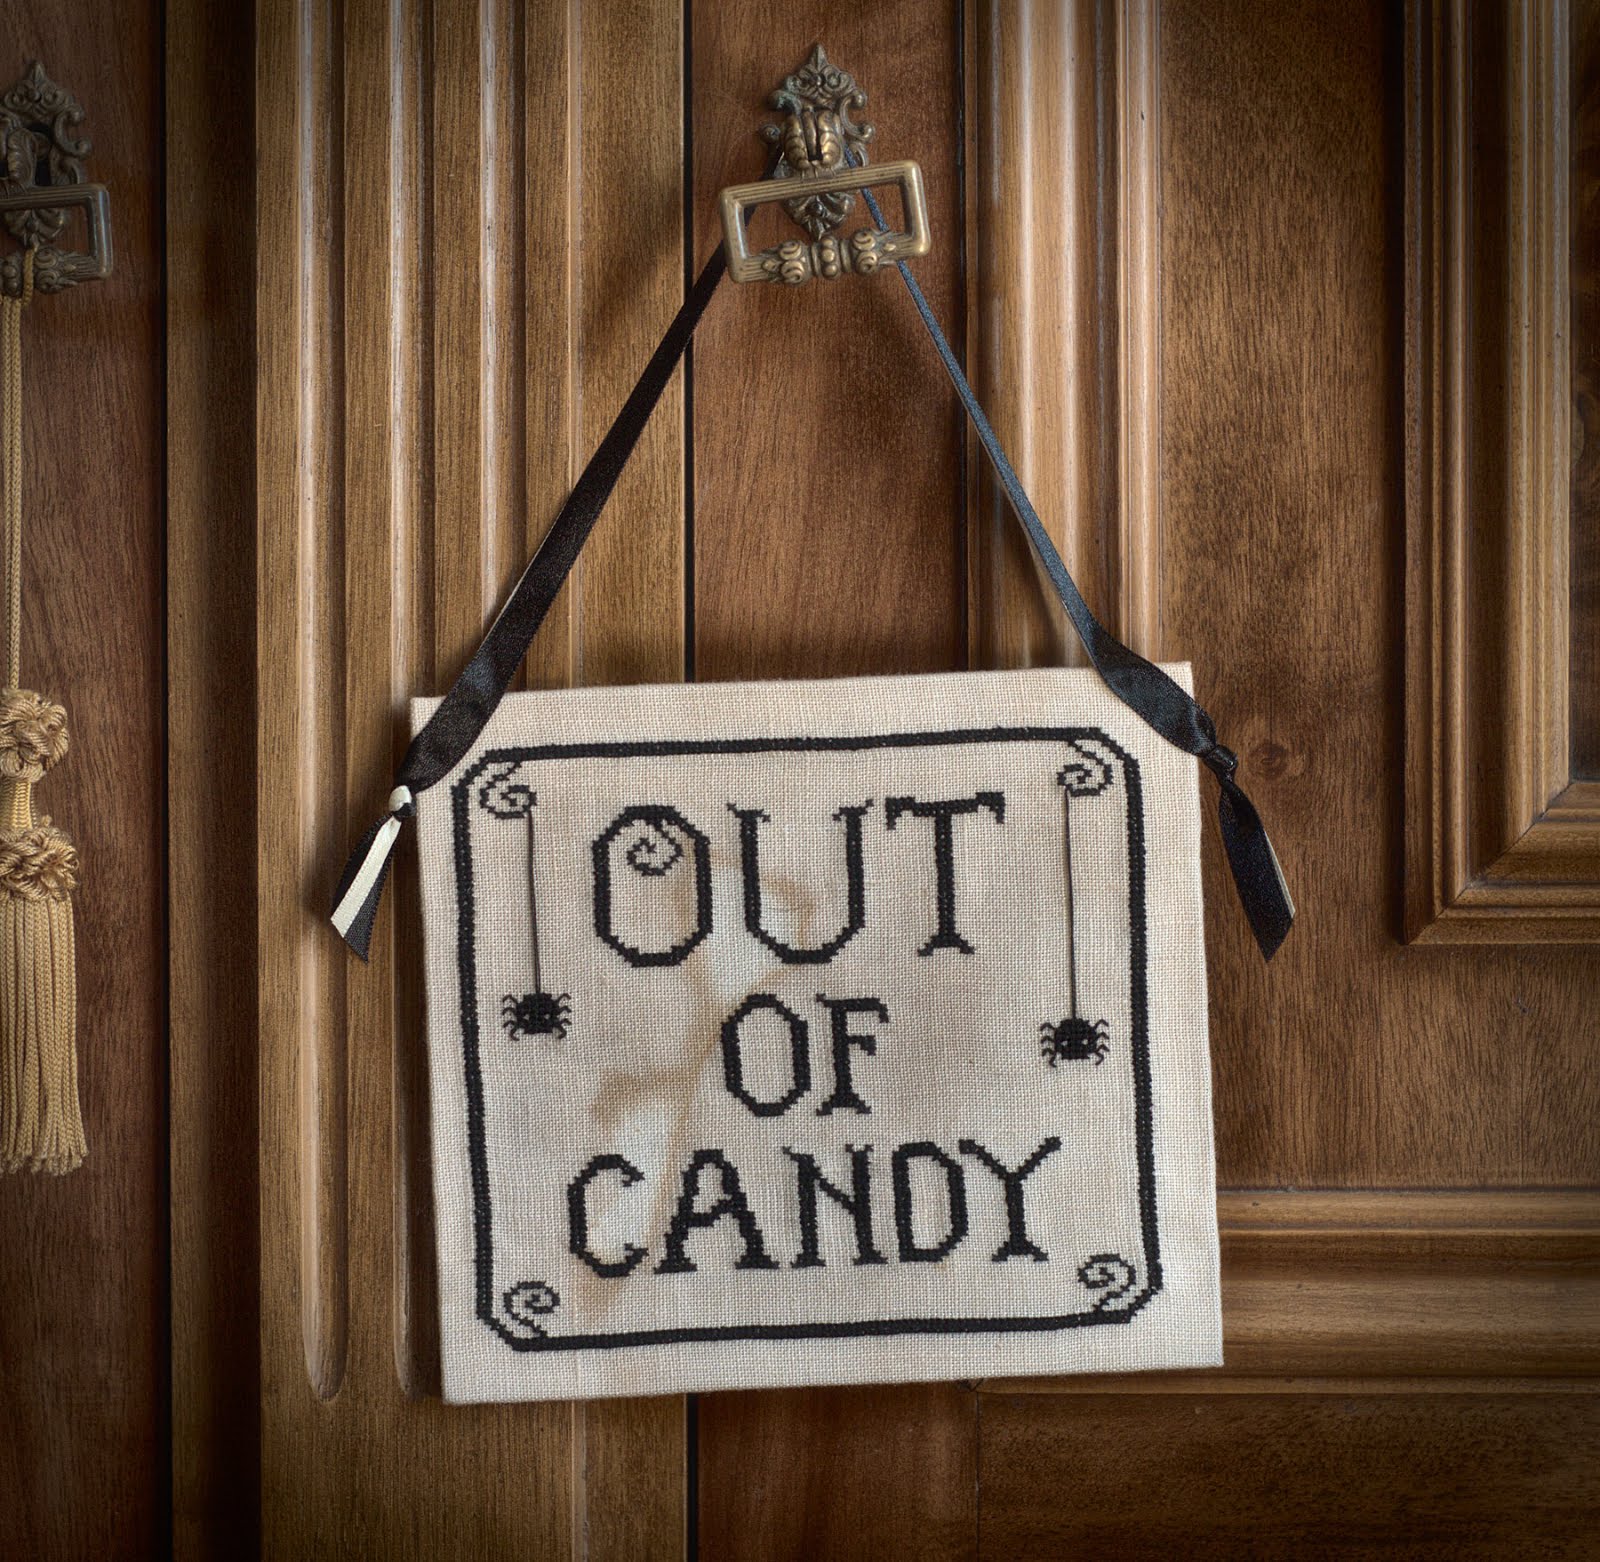 Out of Candy!